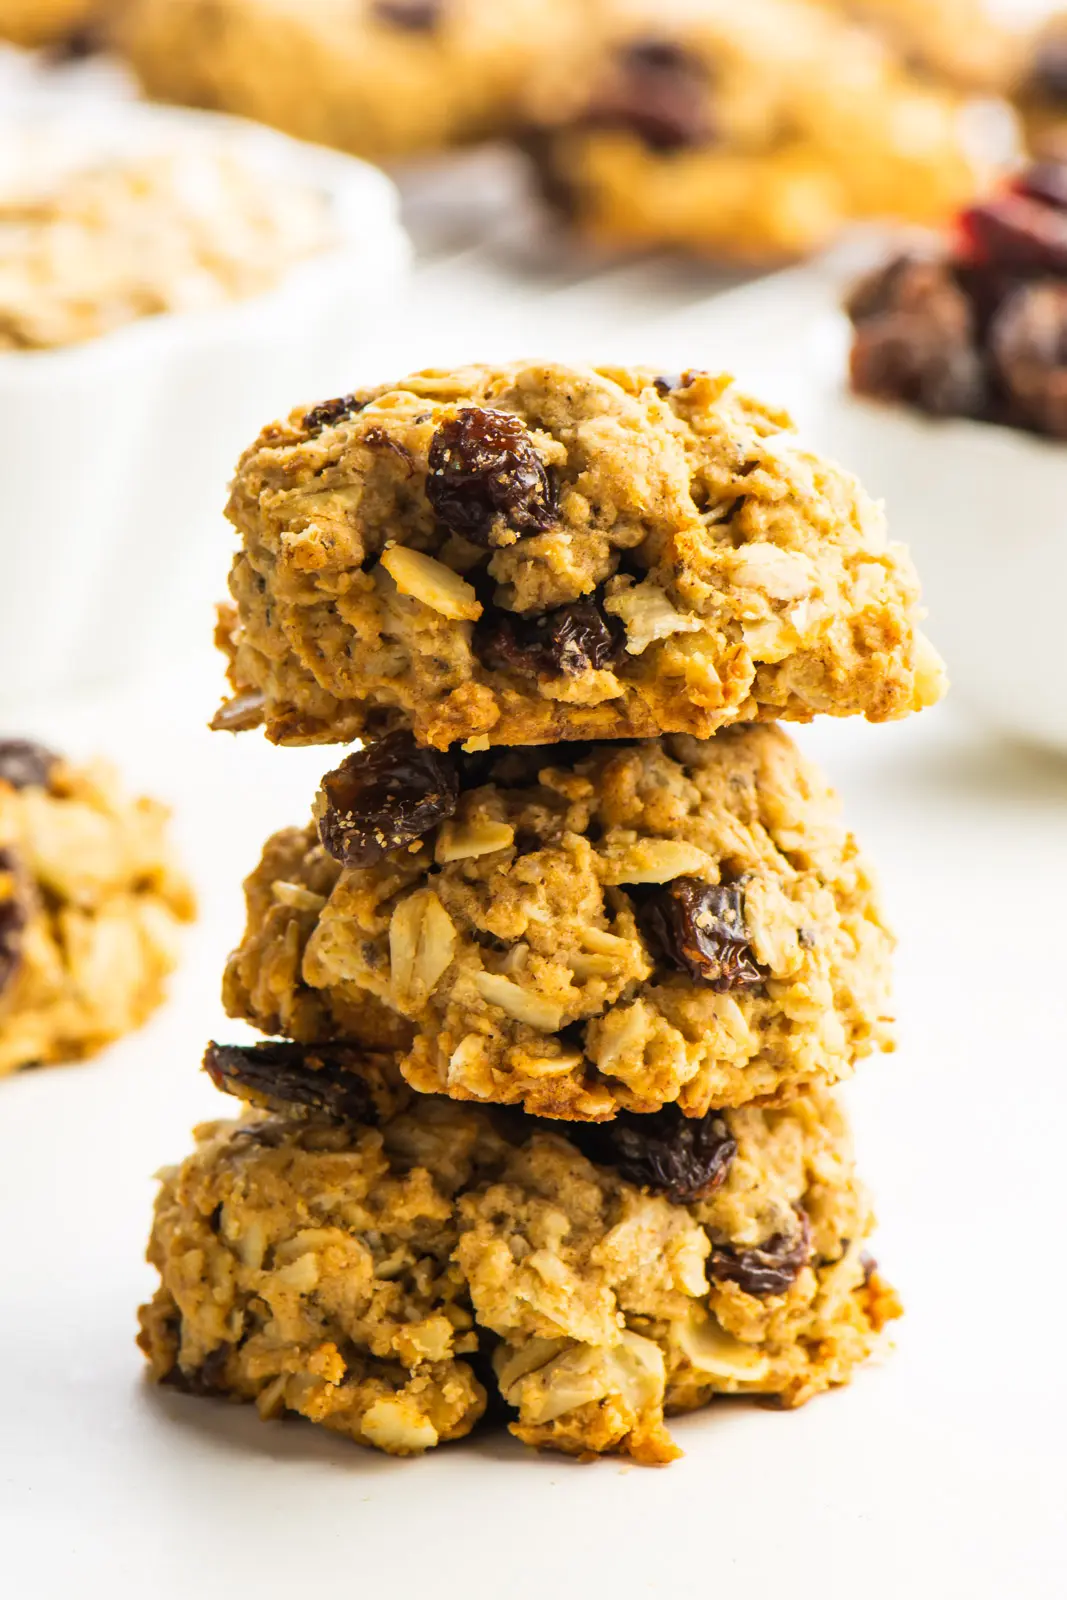 Three oatmeal cookies stacked with more cookies and ingredients around it.